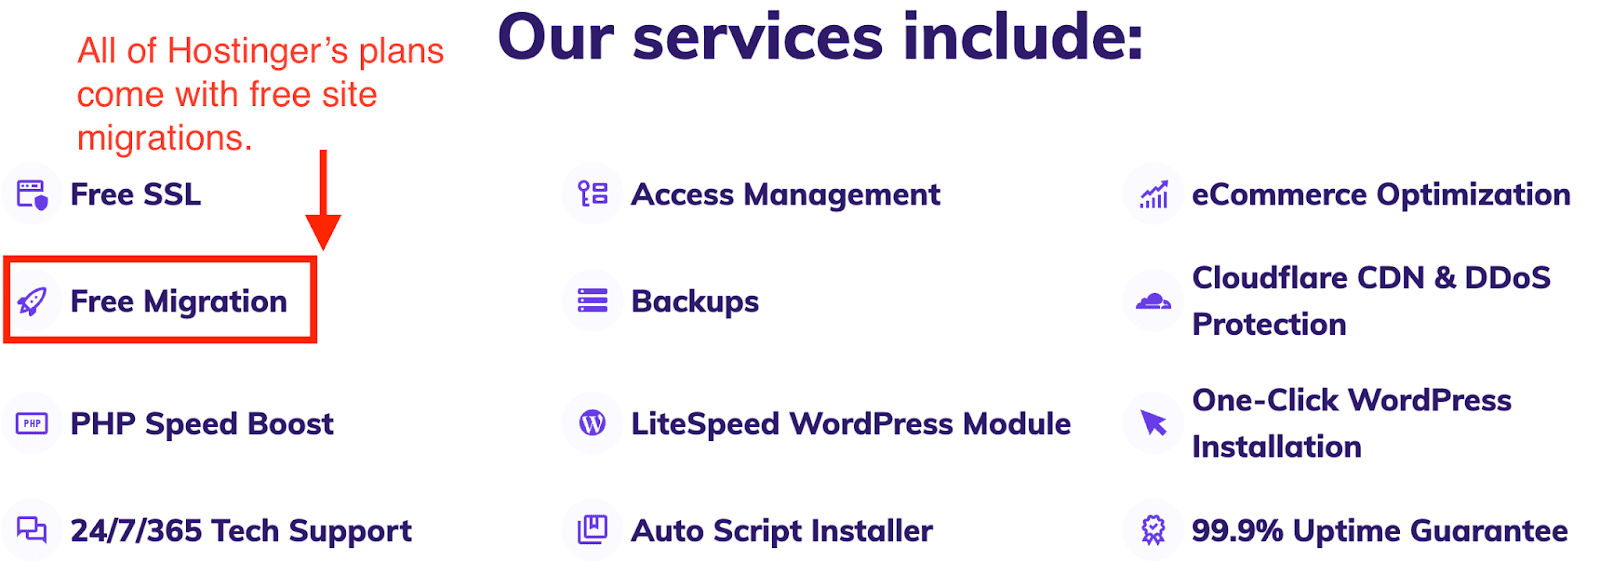 hostinger, our services include